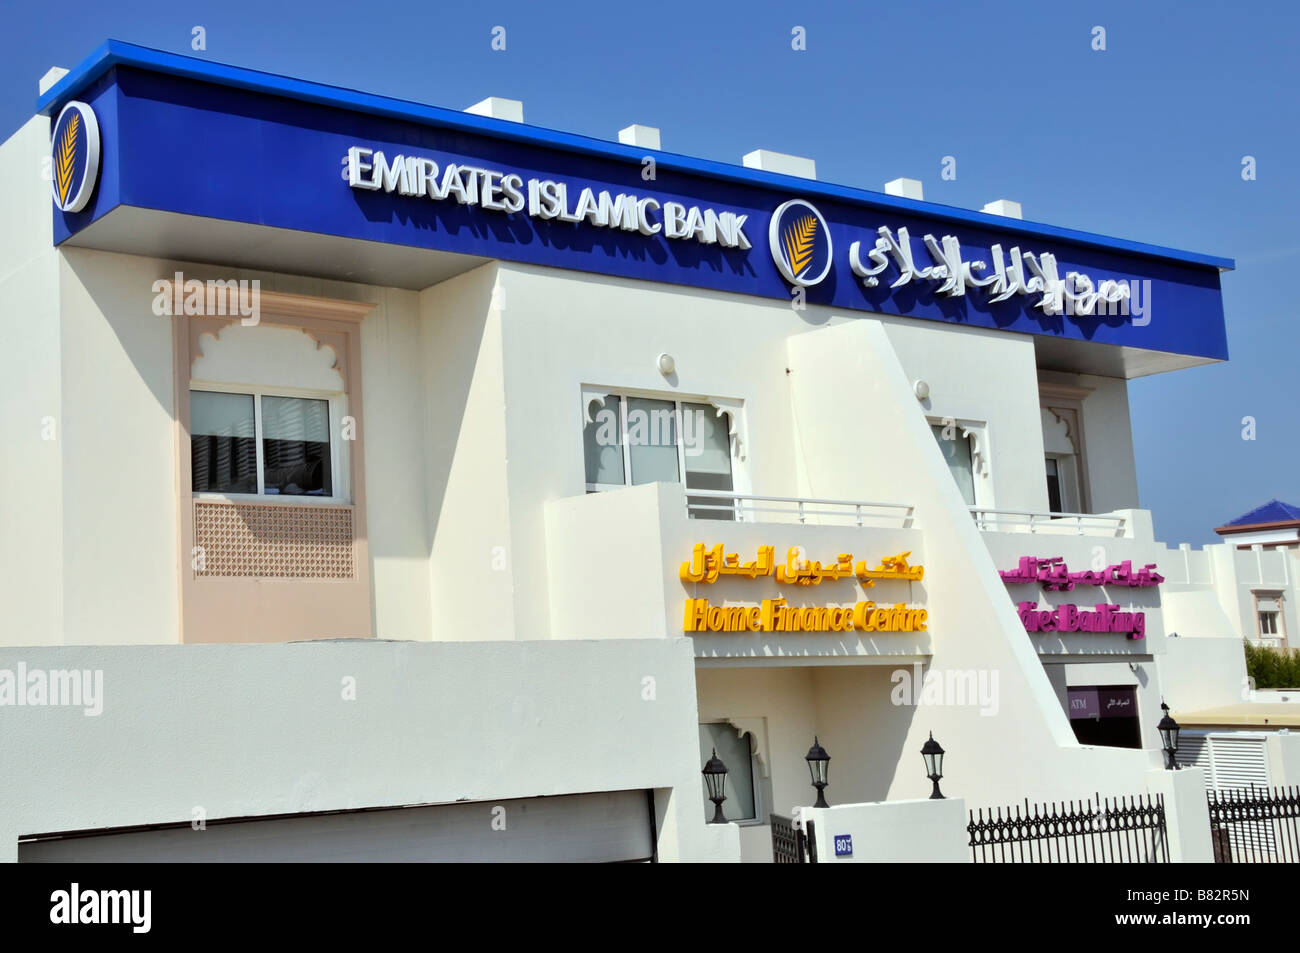 Emirates Islamic Bank premises Dubai with Home Finance Centre and Ladies Banking section Stock Photo